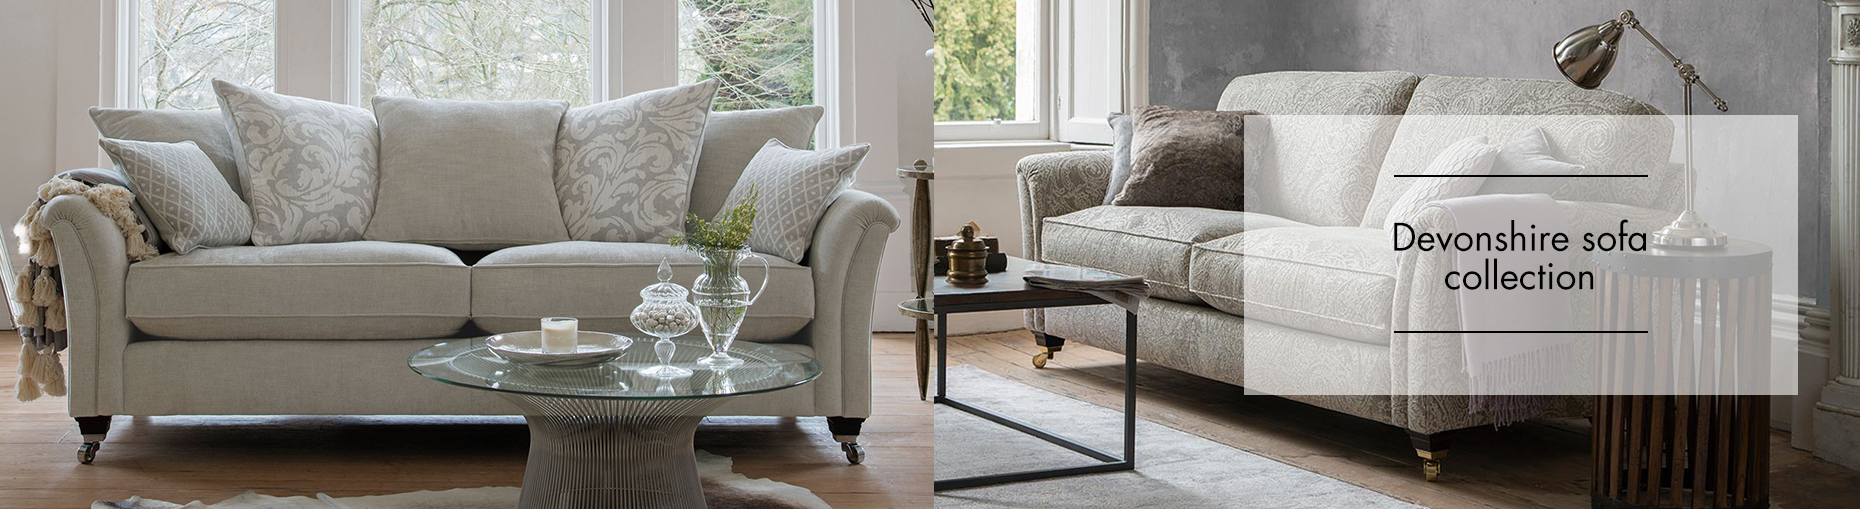 Devonshire Sofa Collection by Parker Knoll at Forrest Furnishing